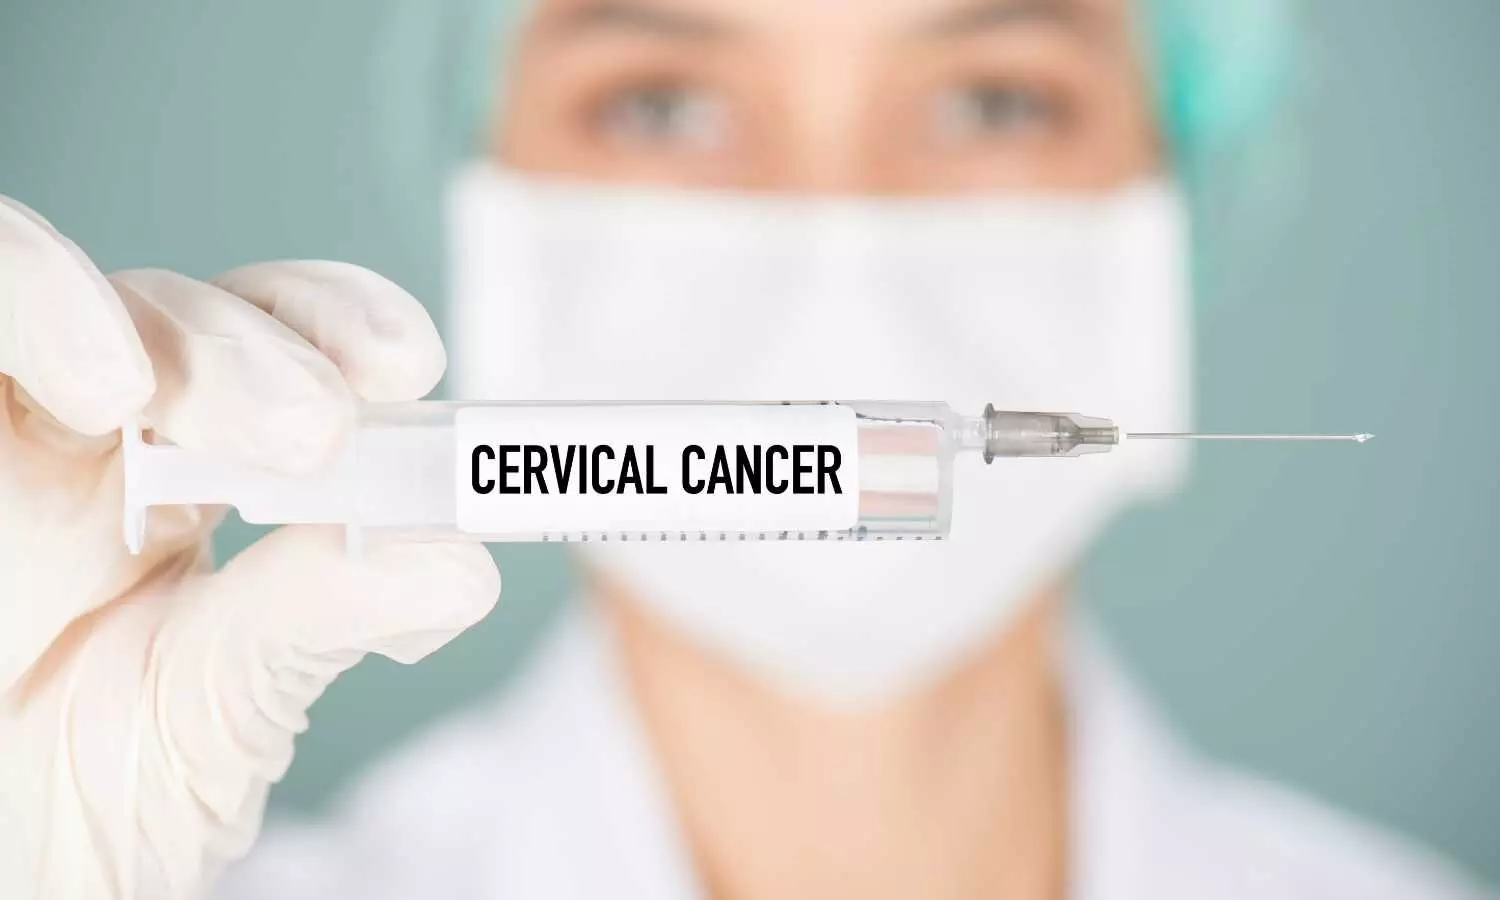 Serum Institute cervical cancer vaccine CERVAVAC to be available in market this month at Rs 2000 for two doses: Sources